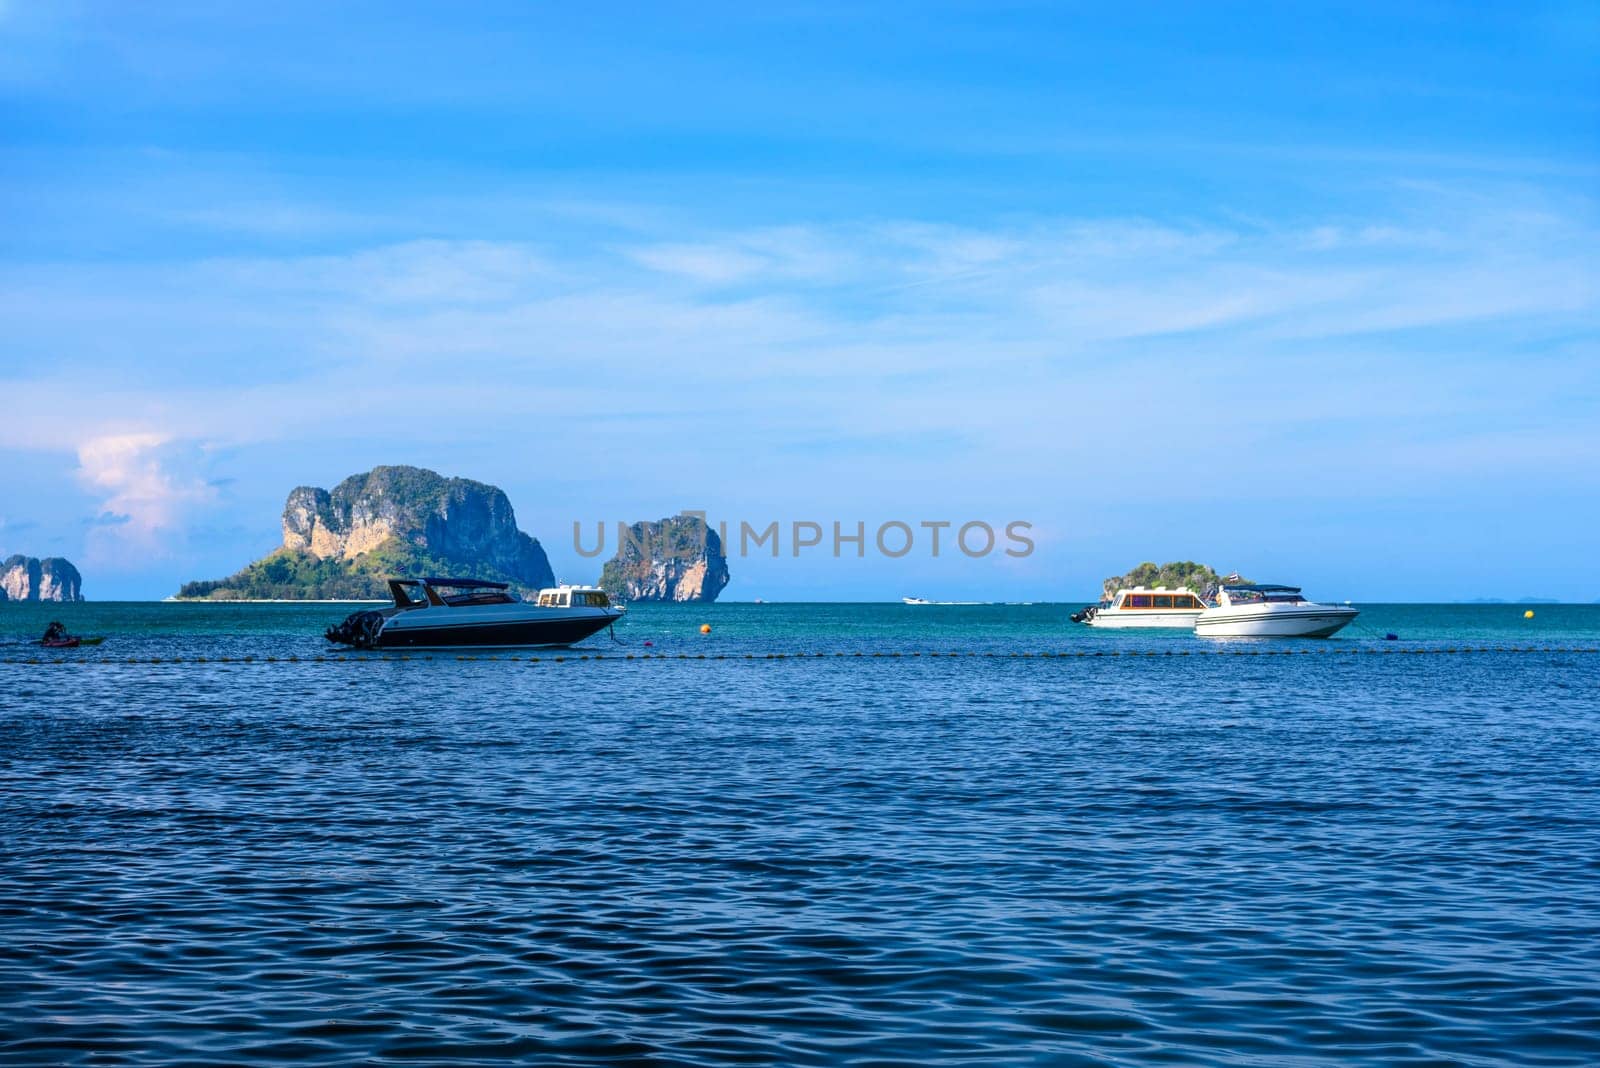 Speed boats in the sea with cliff rocks in the background, Ao Phra Nang Beach, Ao Nang, Krabi, Thailand.